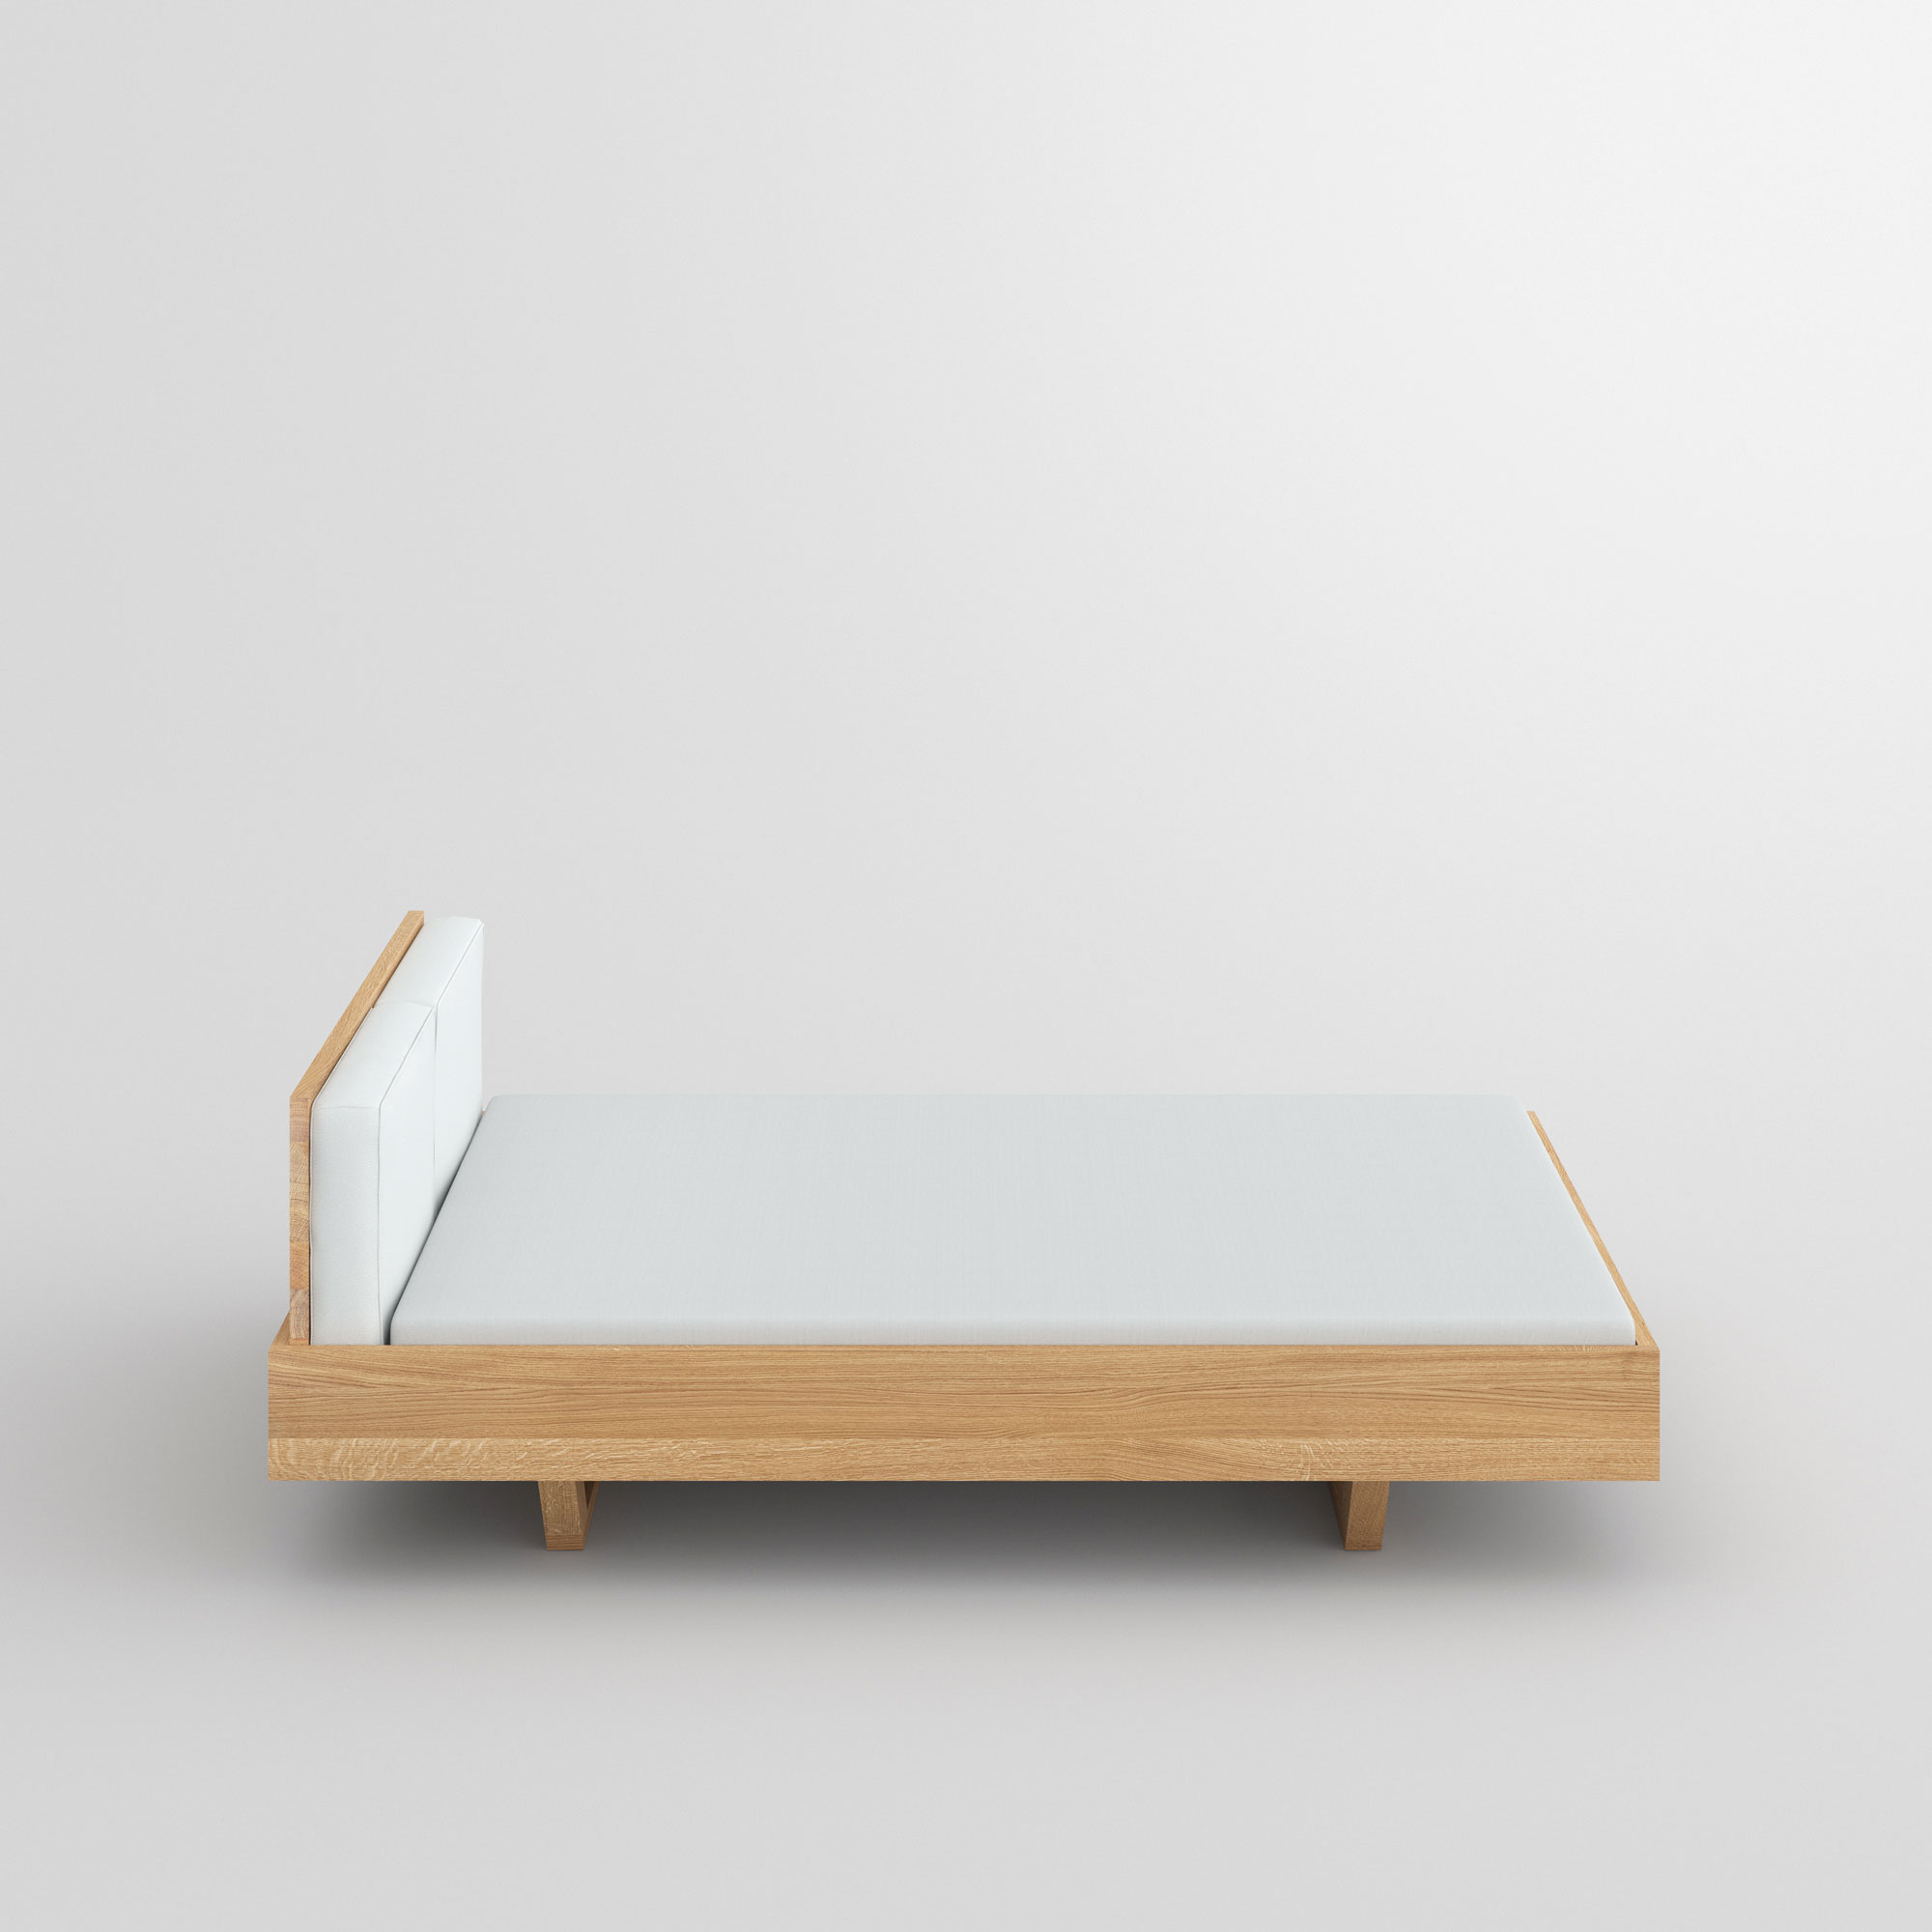 Wood Bed MEA cam3 custom made in solid wood by vitamin design